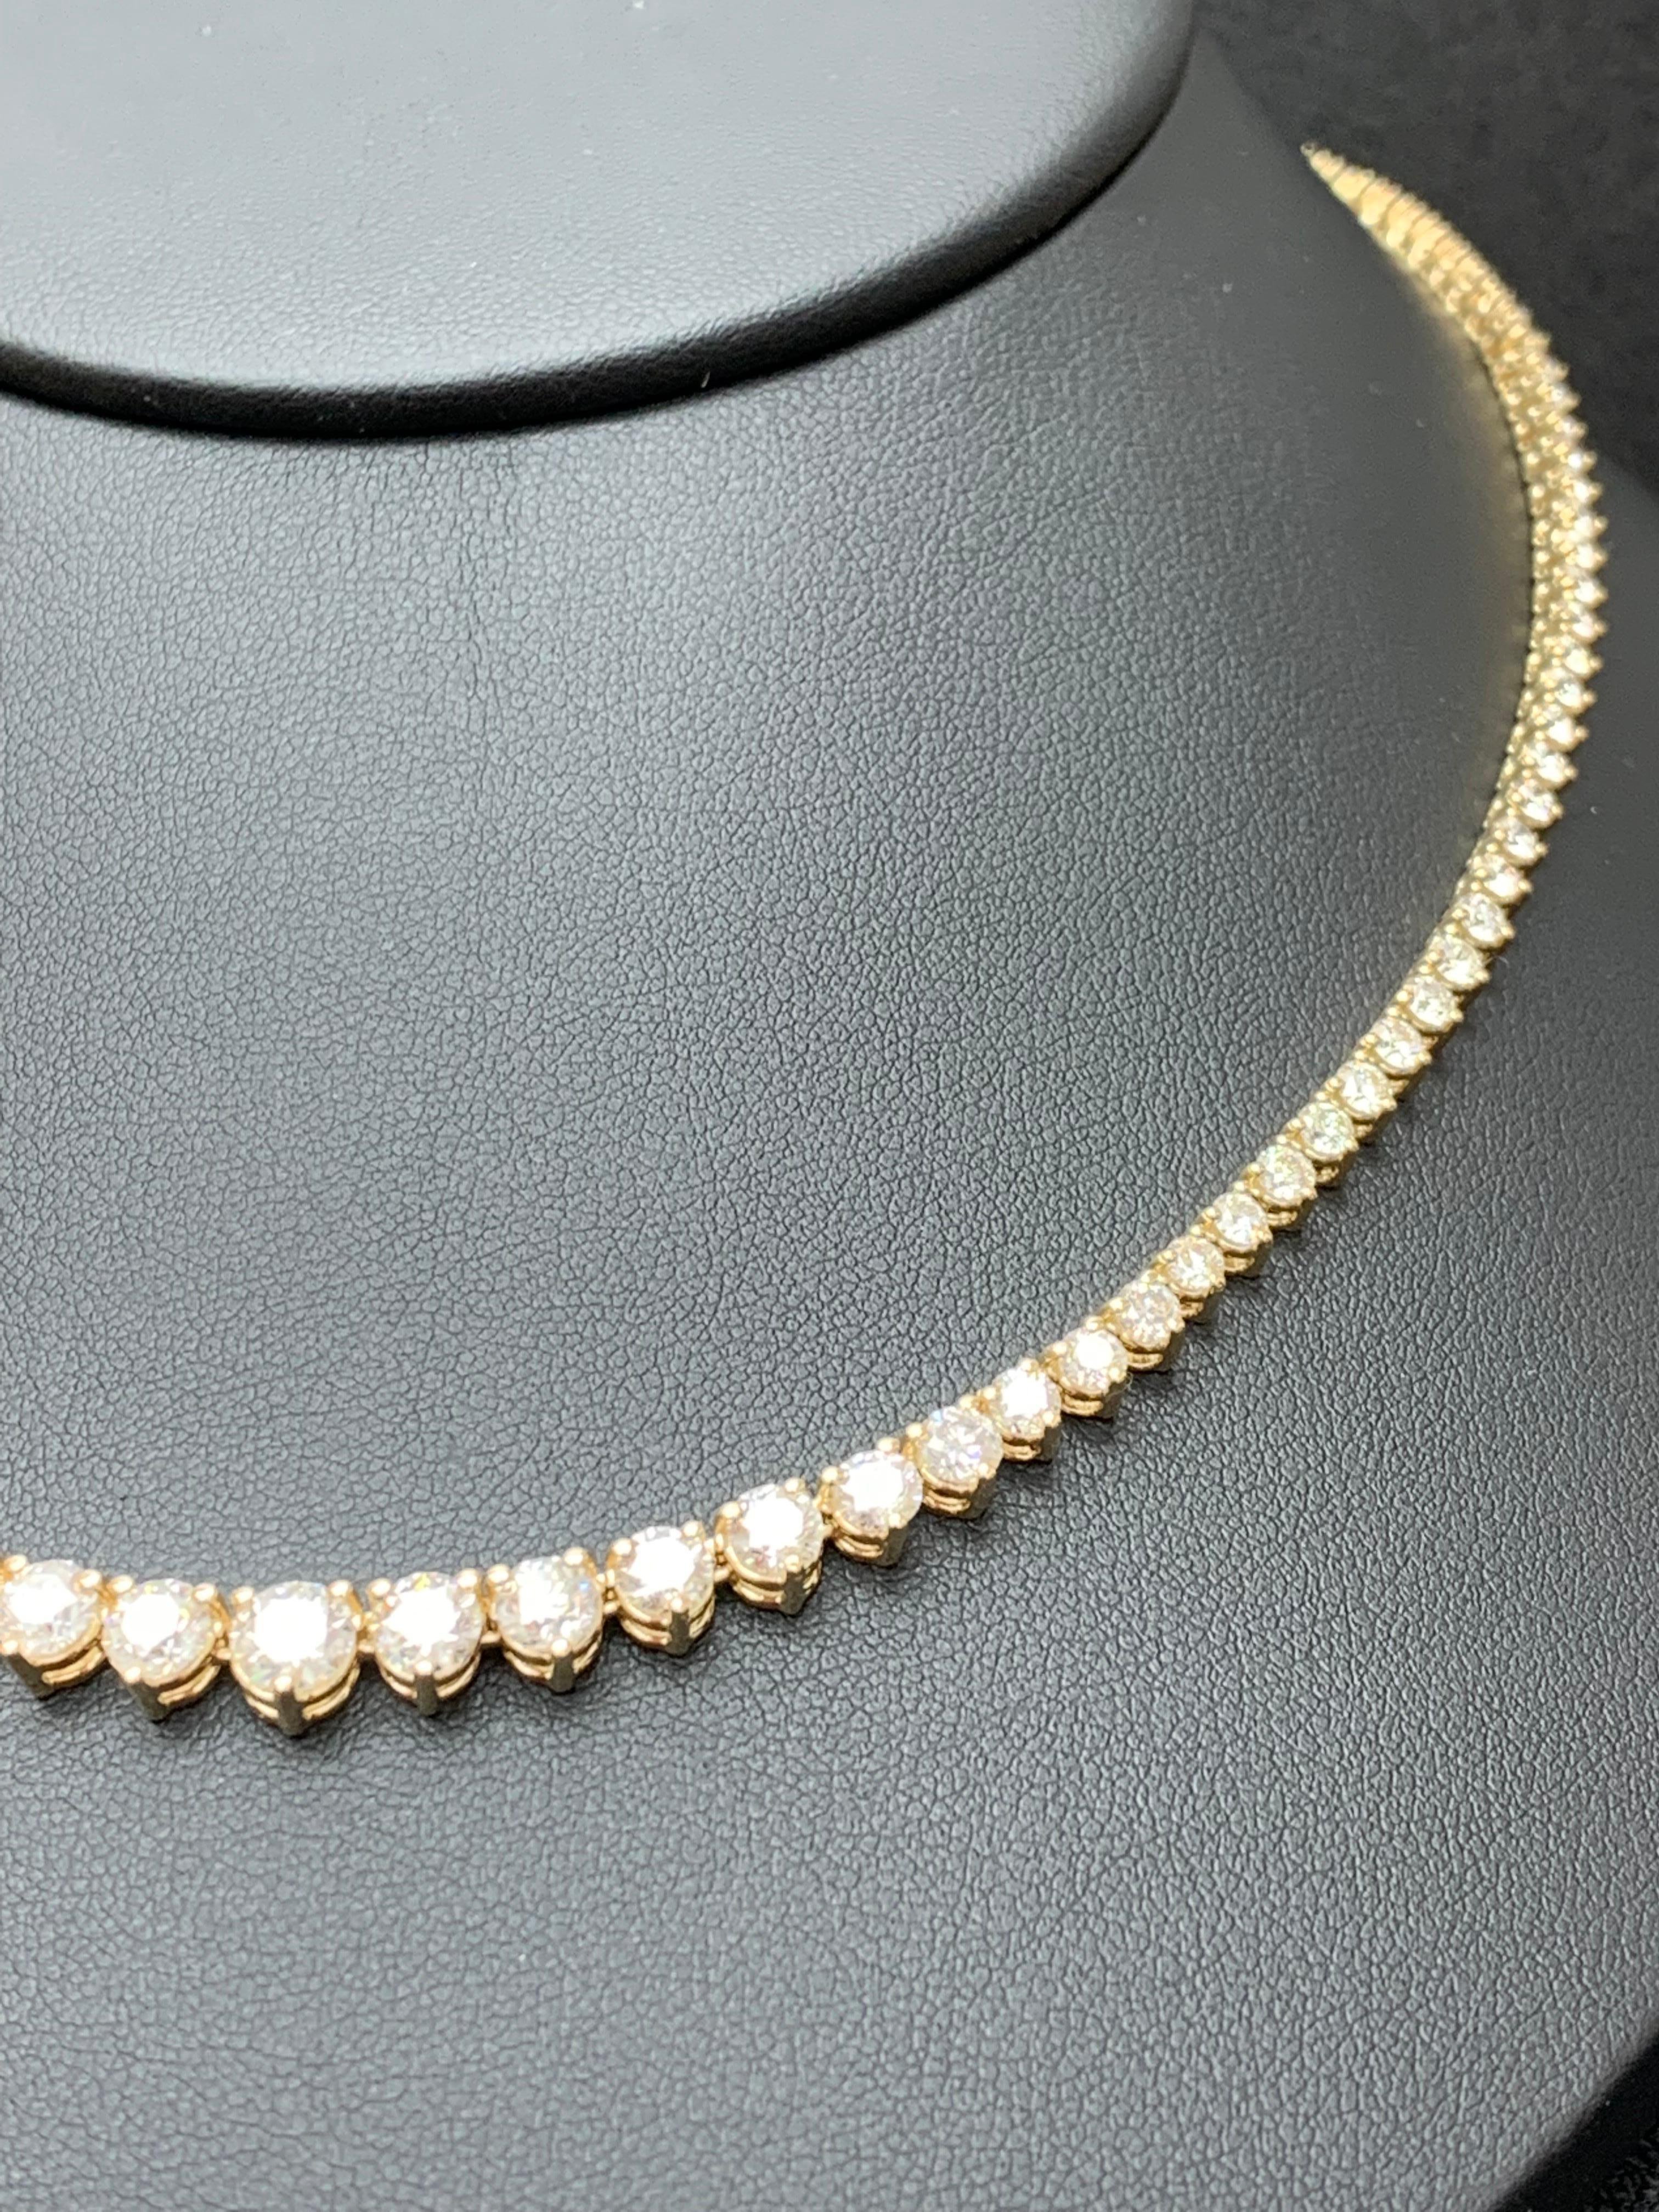 Brilliant Cut 12.05 Carat Graduating Round Diamond Riviere Tennis Necklace in 14K Yellow Gold For Sale